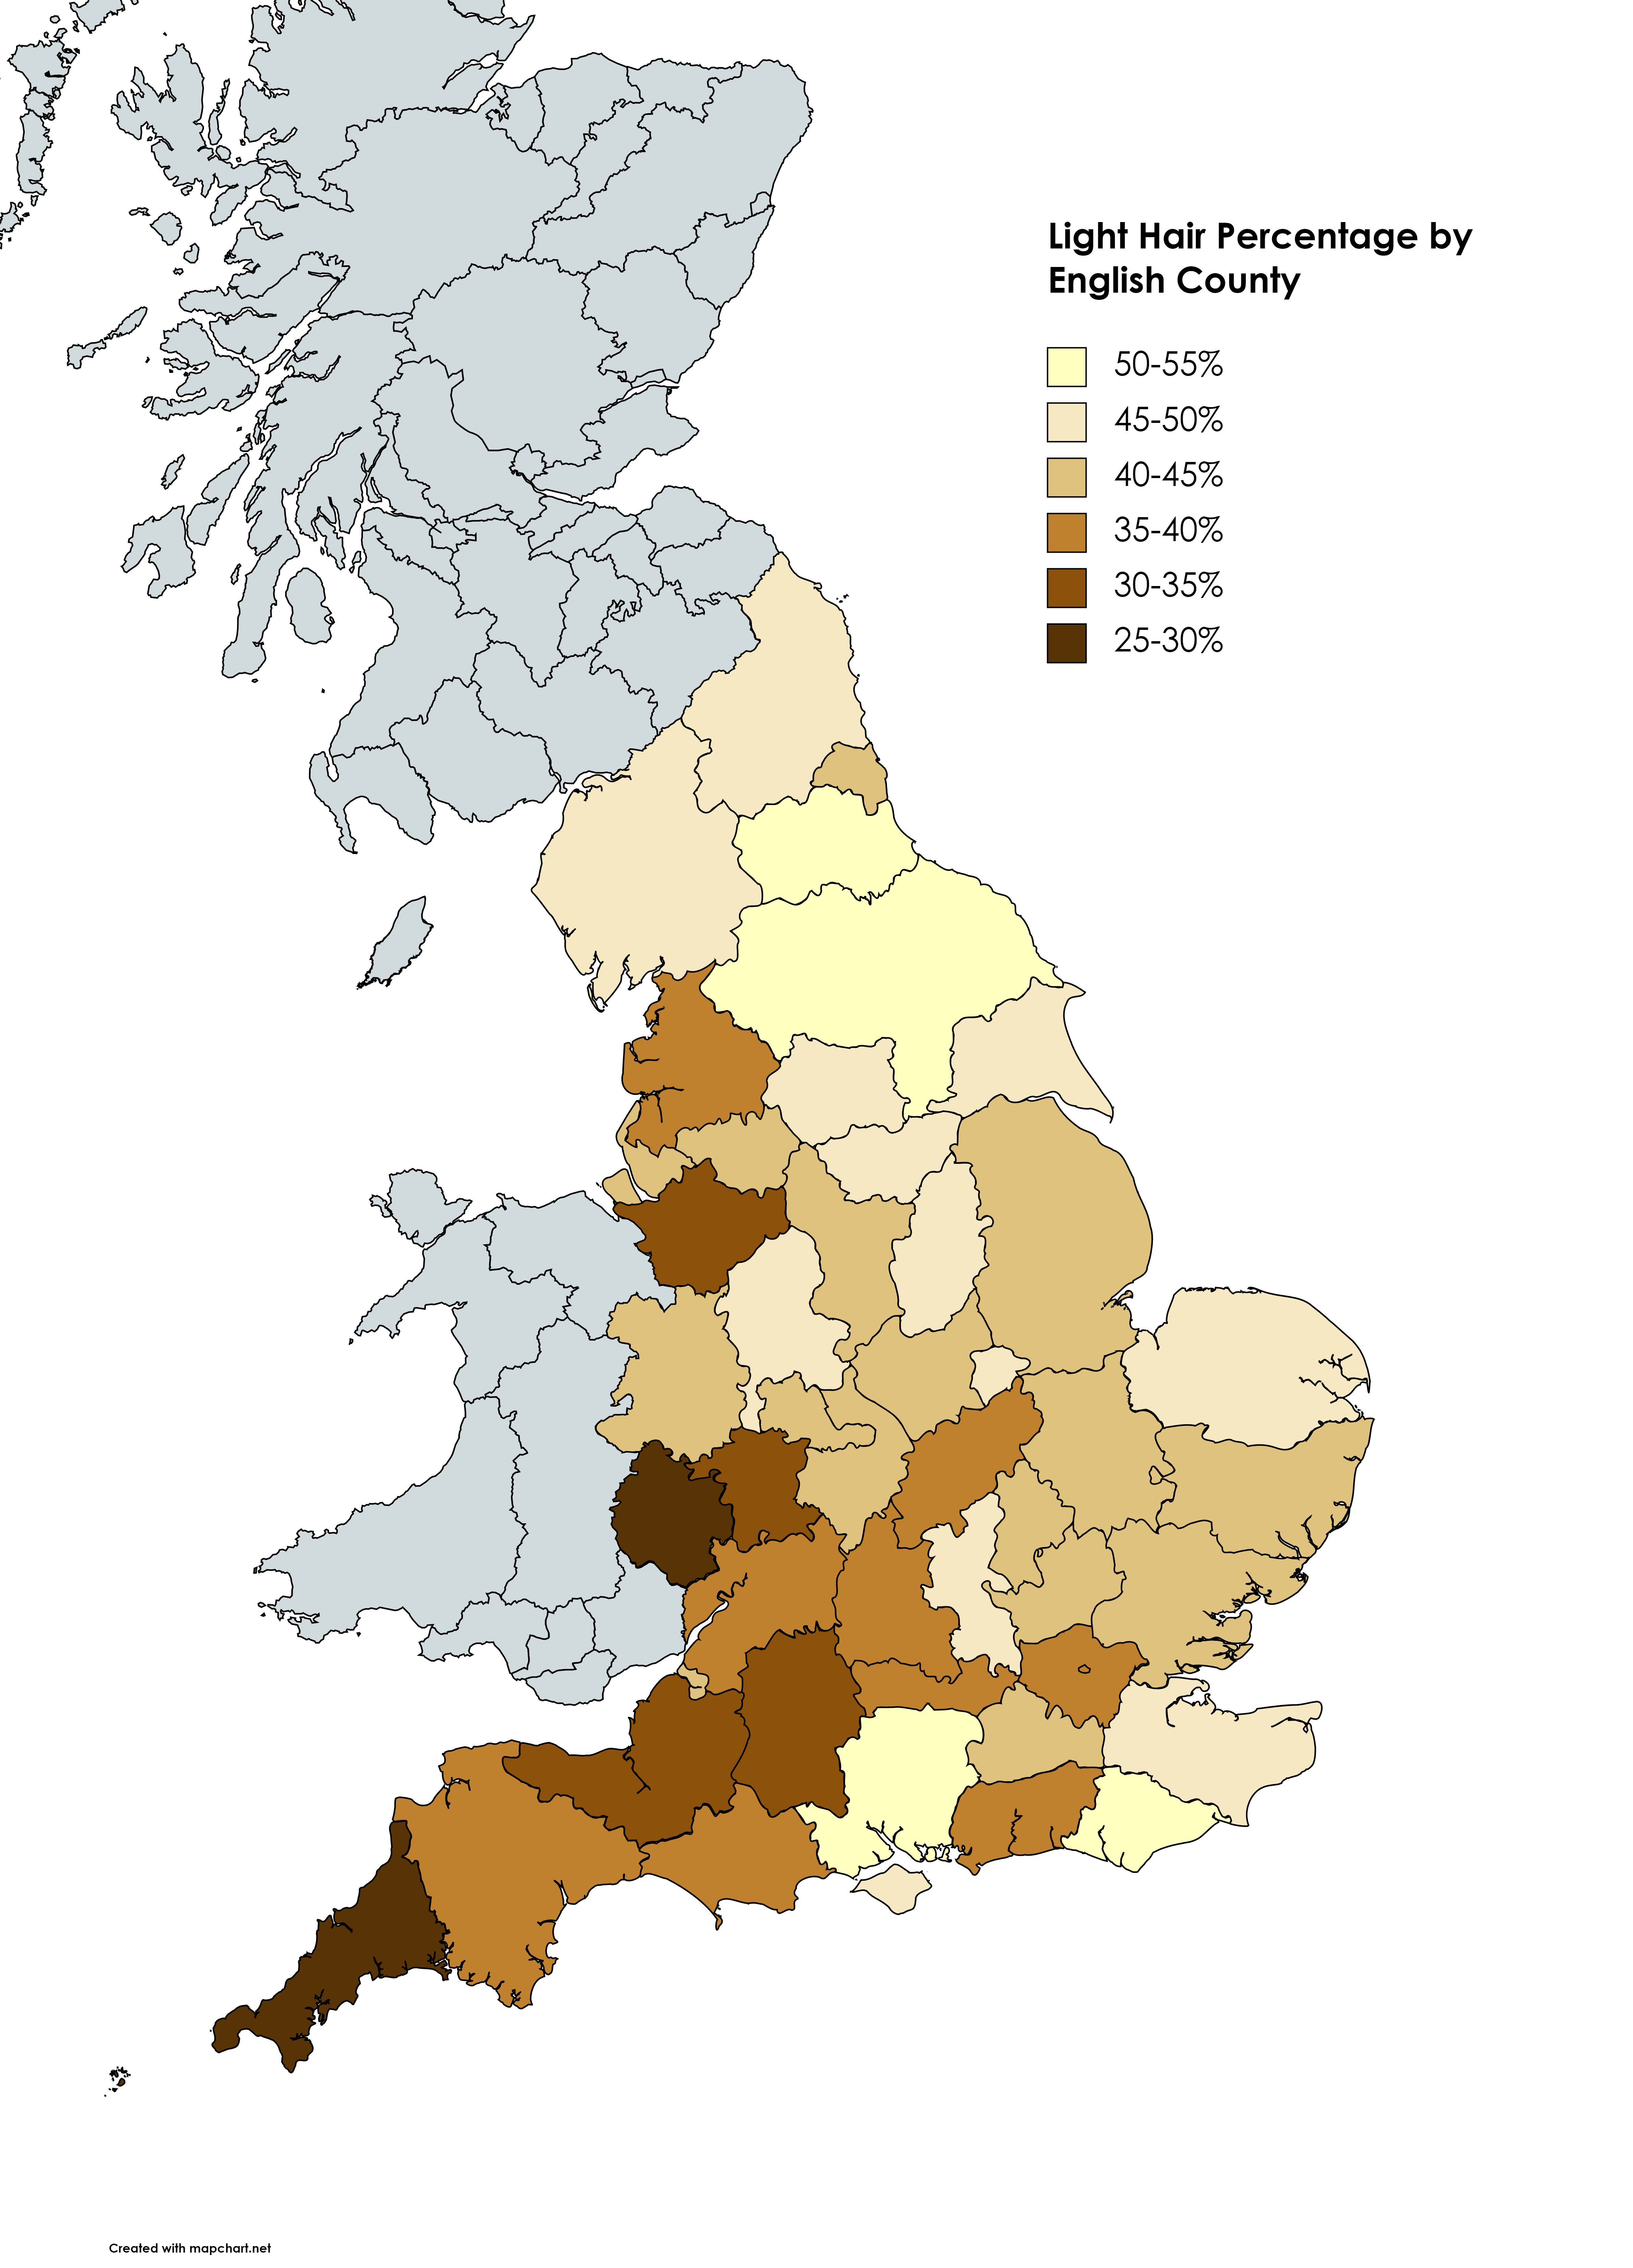 Which these blond hair maps of England is more correct?